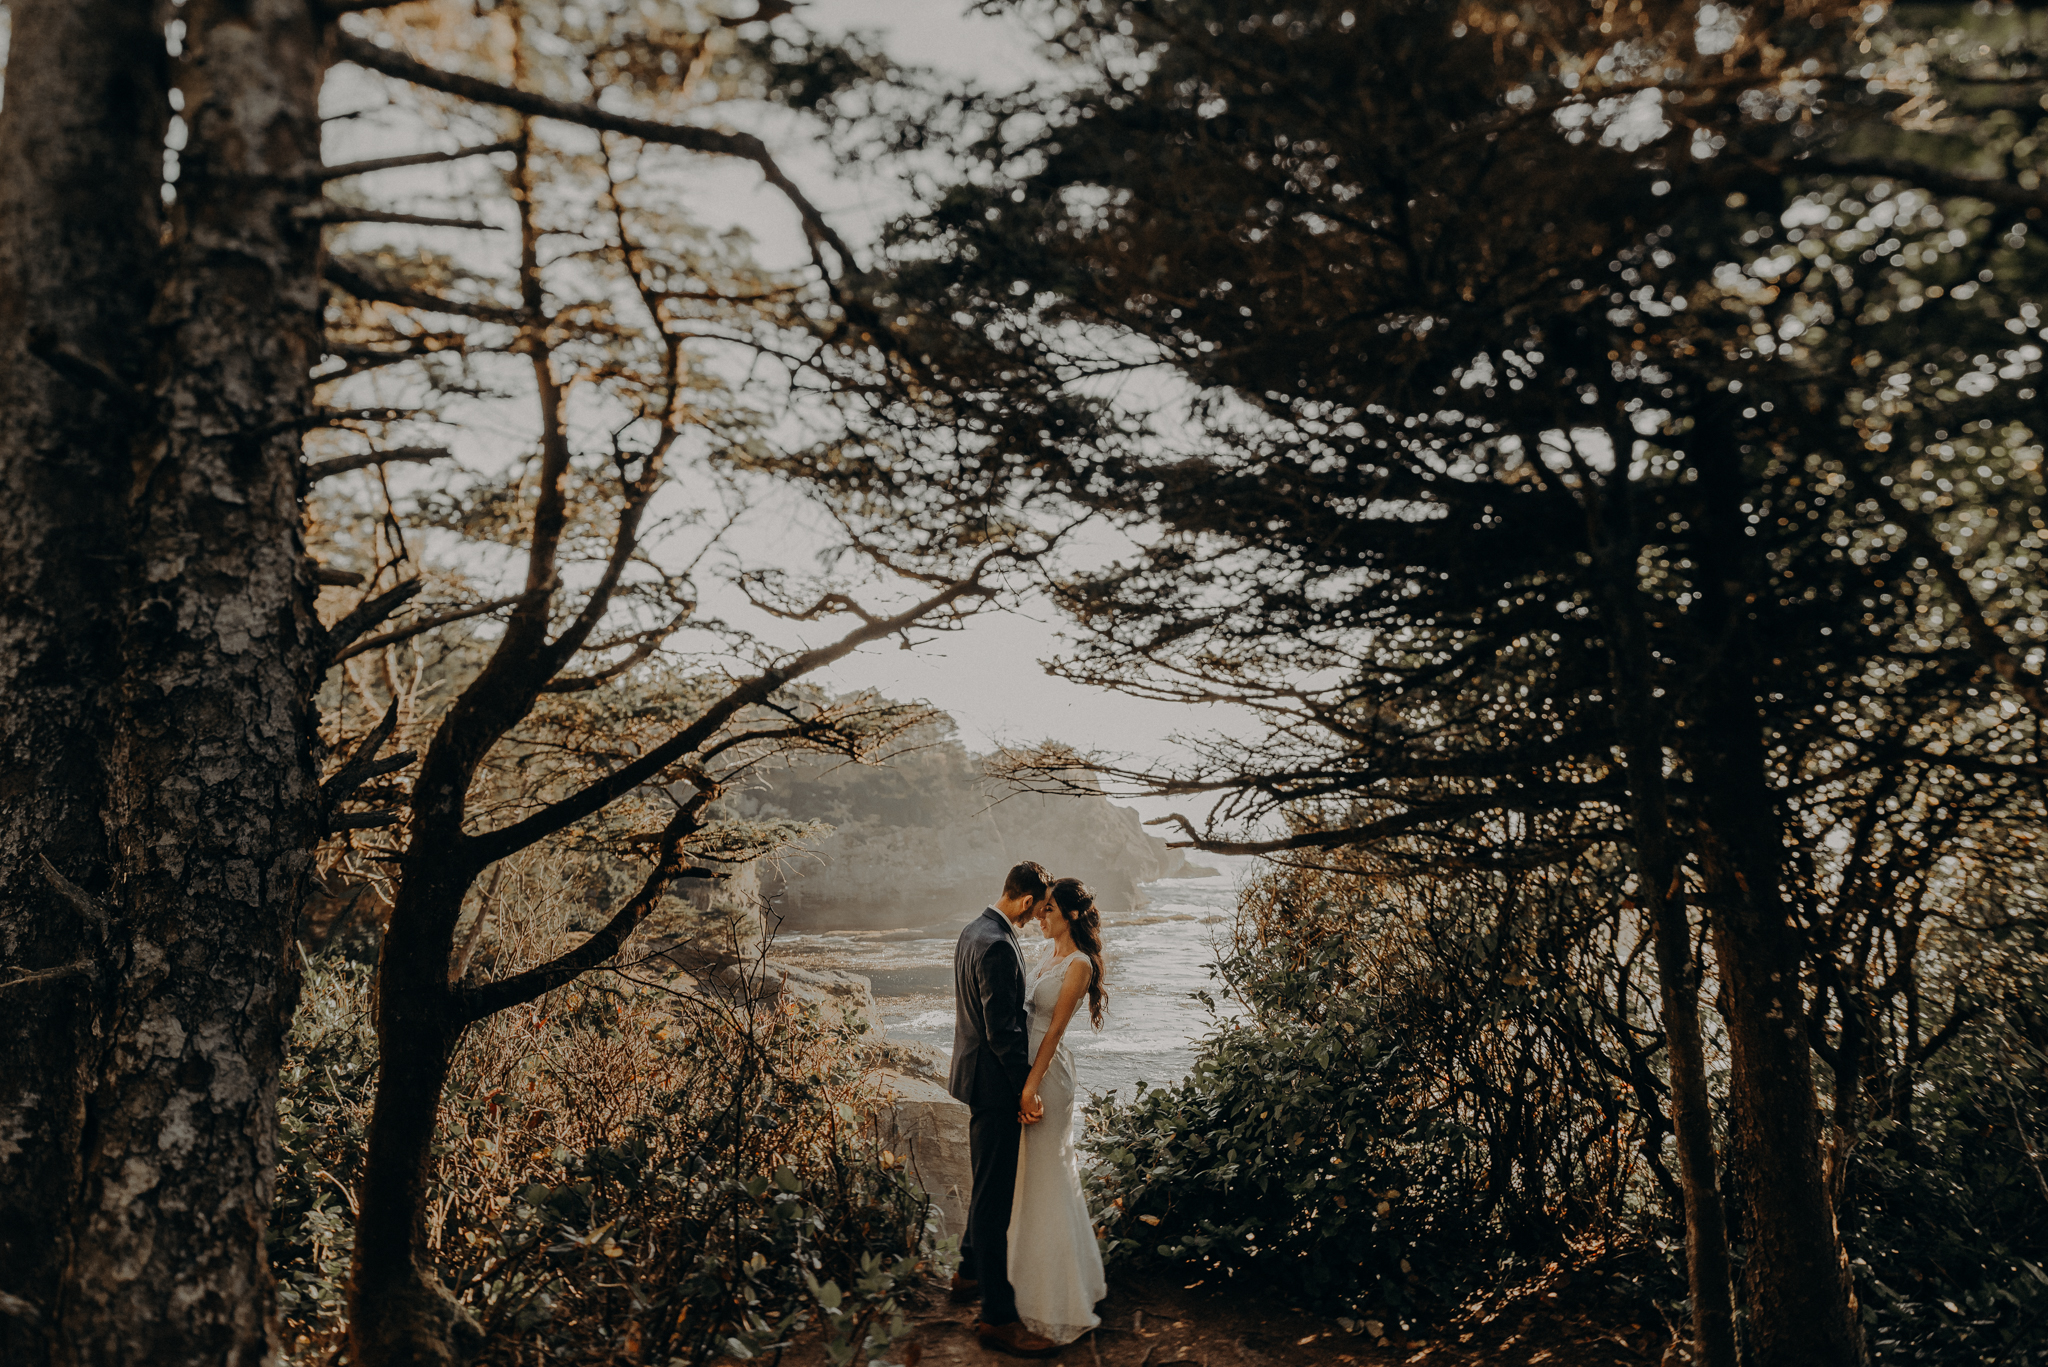 Isaiah + Taylor Photography - Cape Flattery Elopement, Olympia National Forest Wedding Photographer-081.jpg